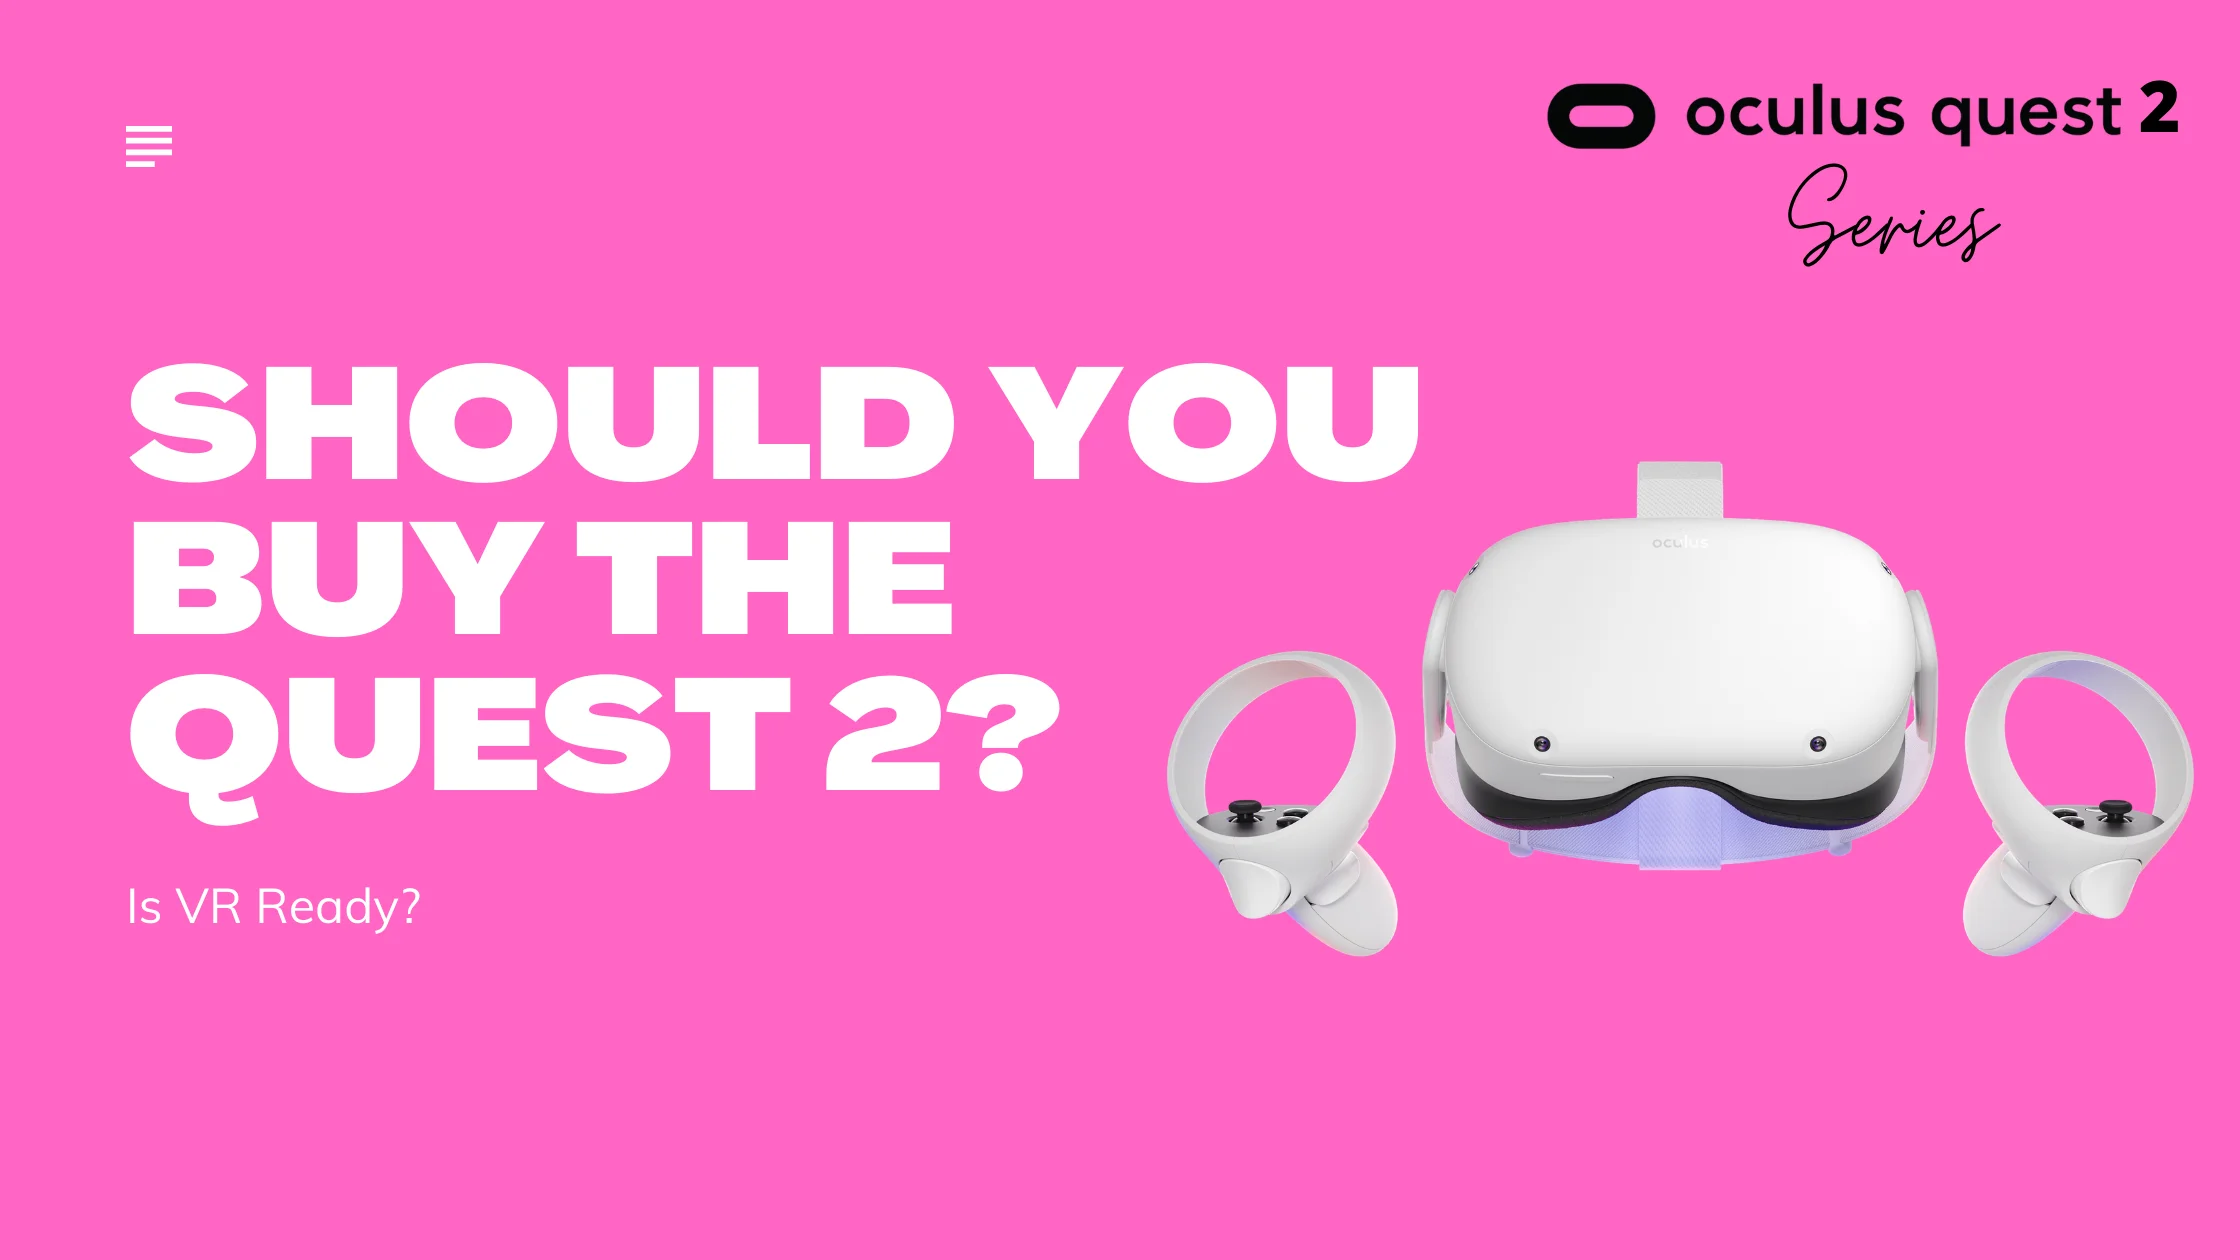 should you buy the quest 2 is vr ready shouldyoubuythequest2